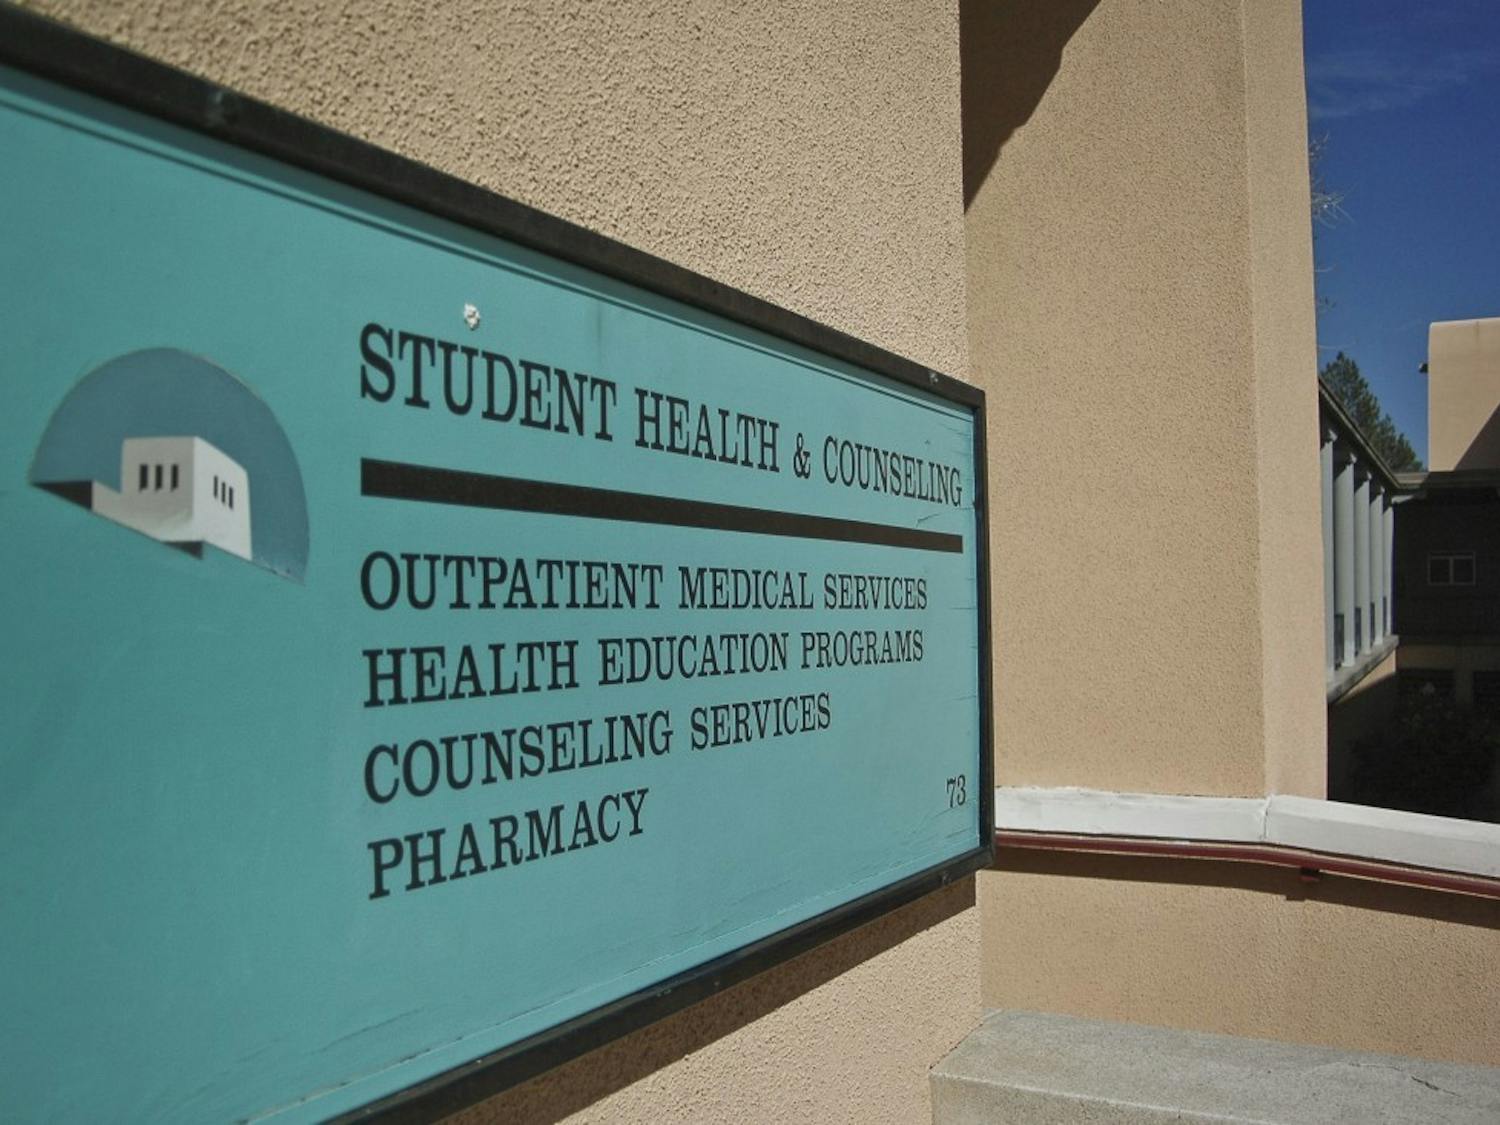 Outside of the Student Health and Counseling building on the University of New Mexico campus.